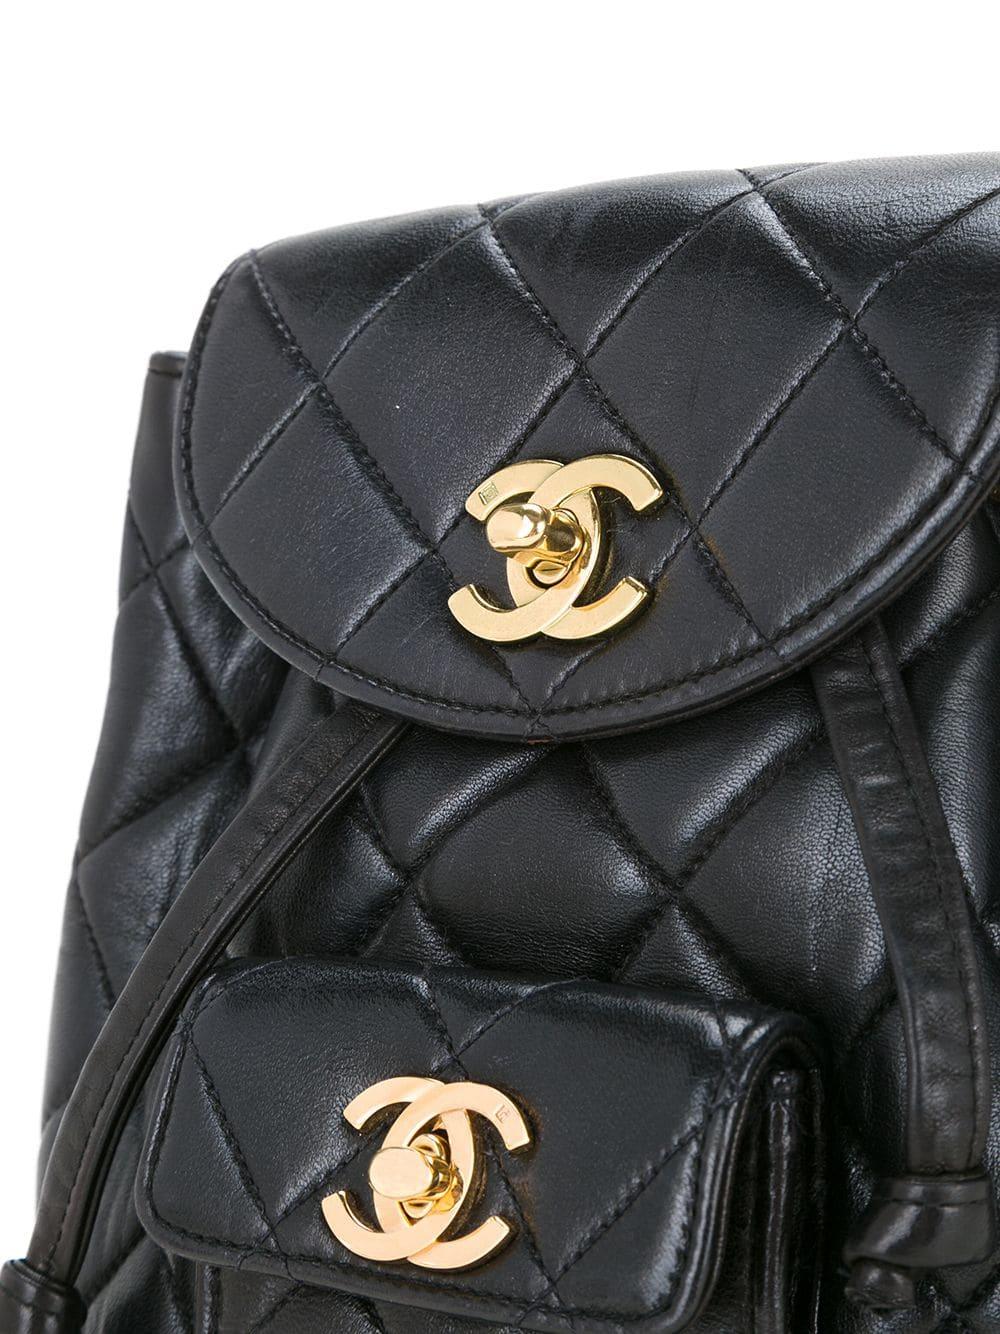 Chanel Quilted Vintage 1994 Micro Mini Rucksack Black Duma Leather Backpack For Sale 1